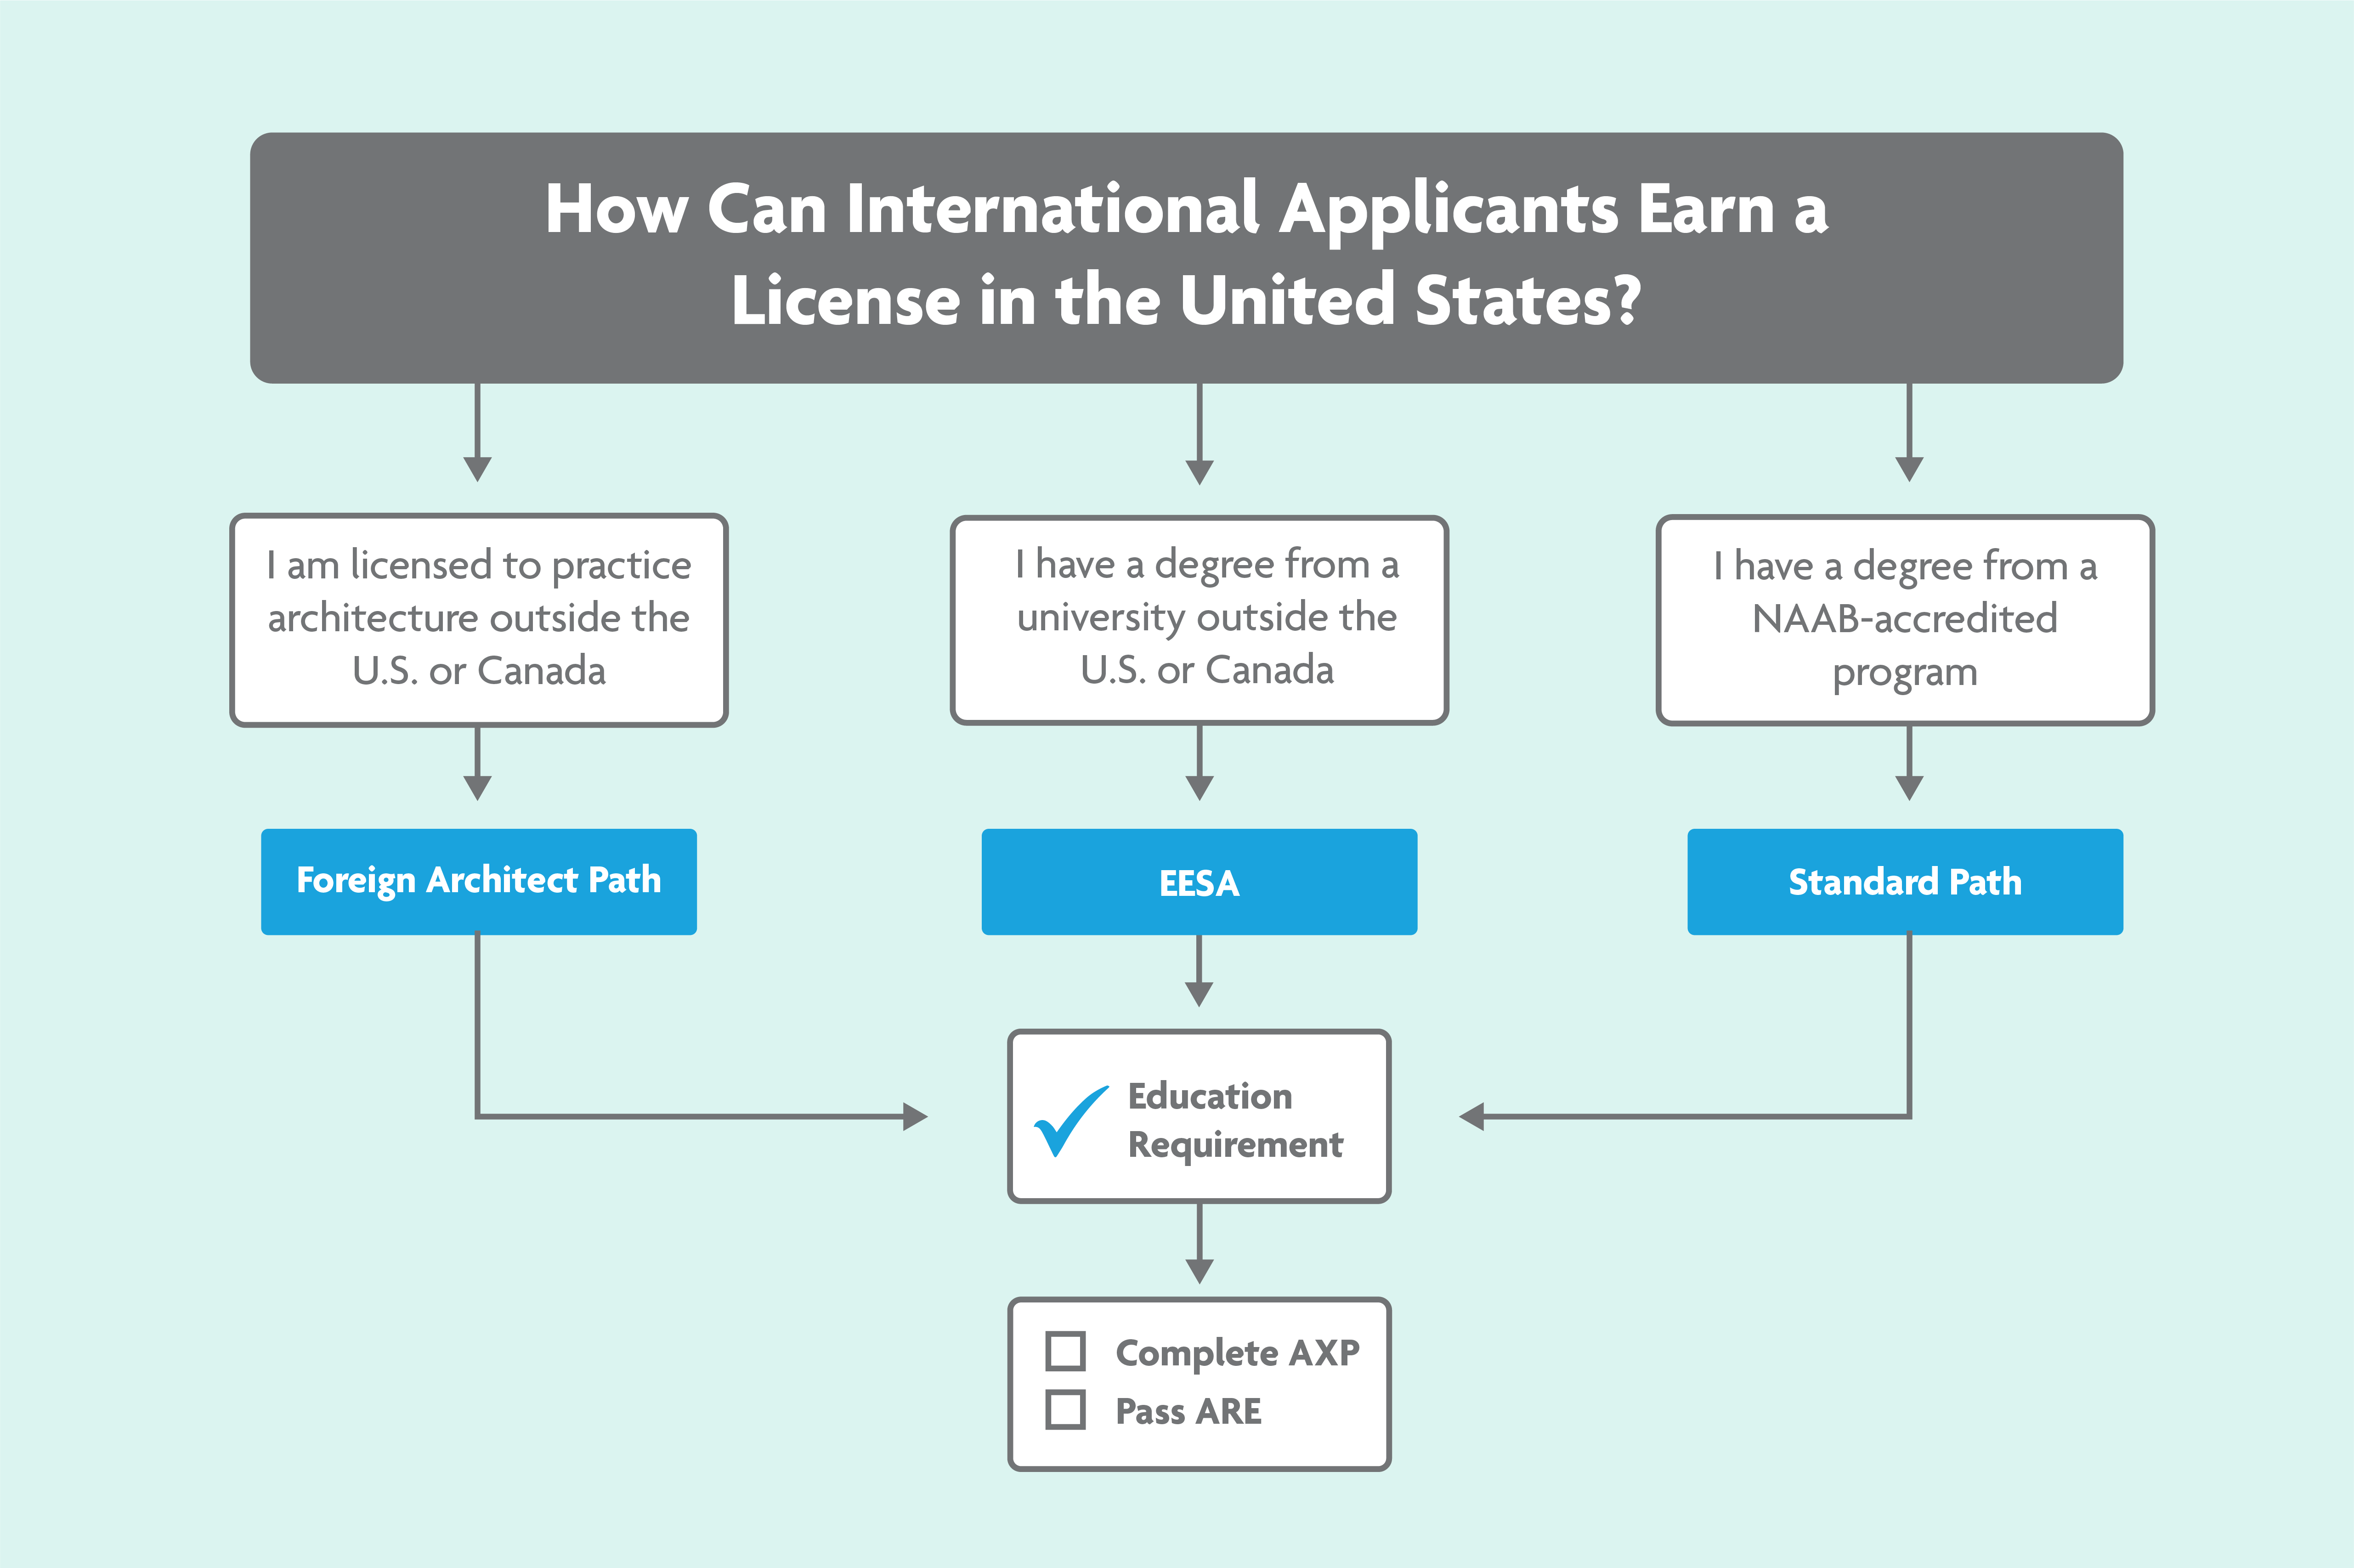 Flow chart shows how to pursue a license as a foreign architect or applicant. 